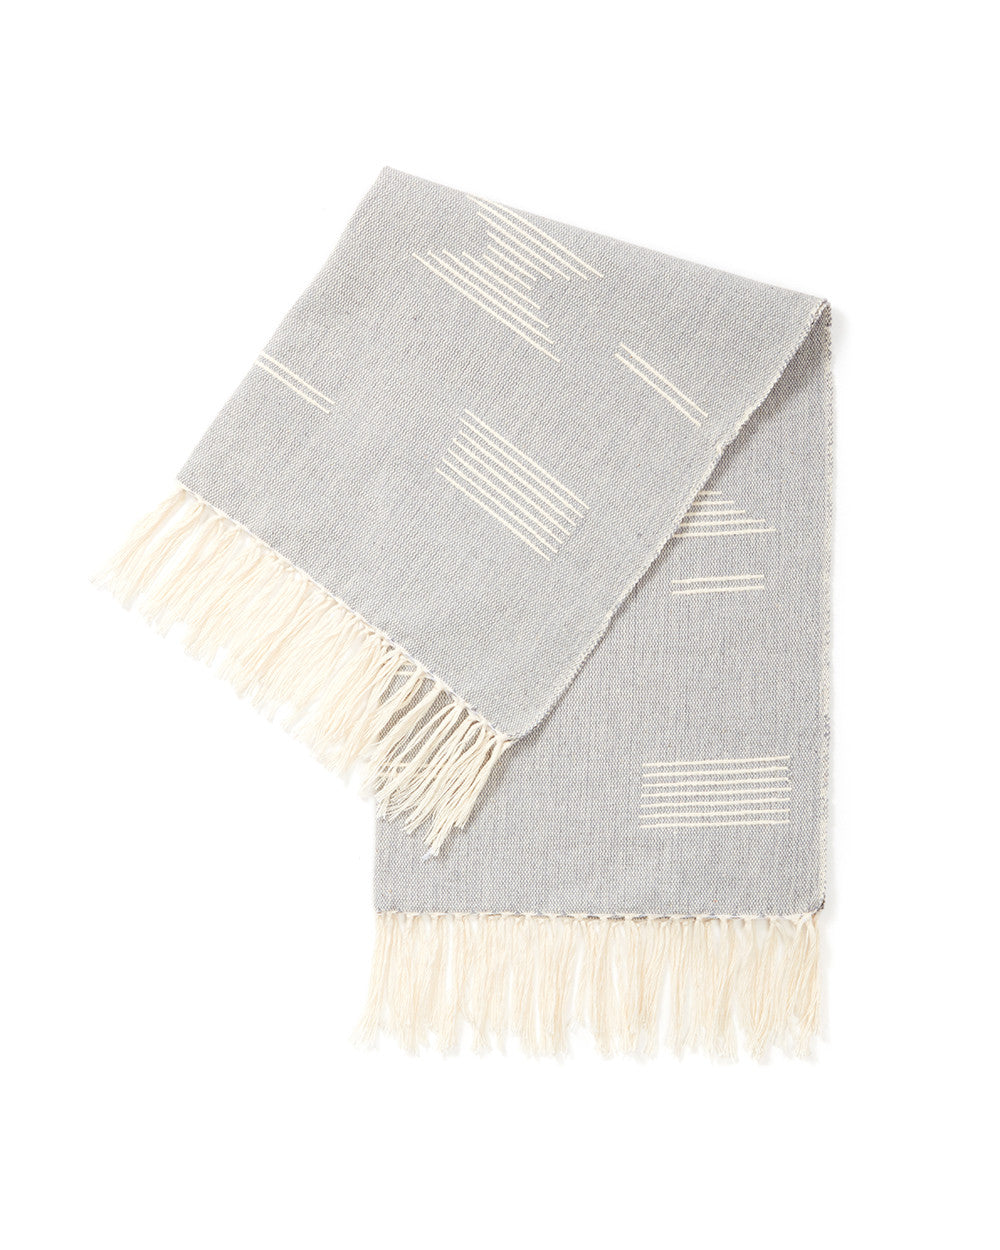 Shapes Towel in Grey